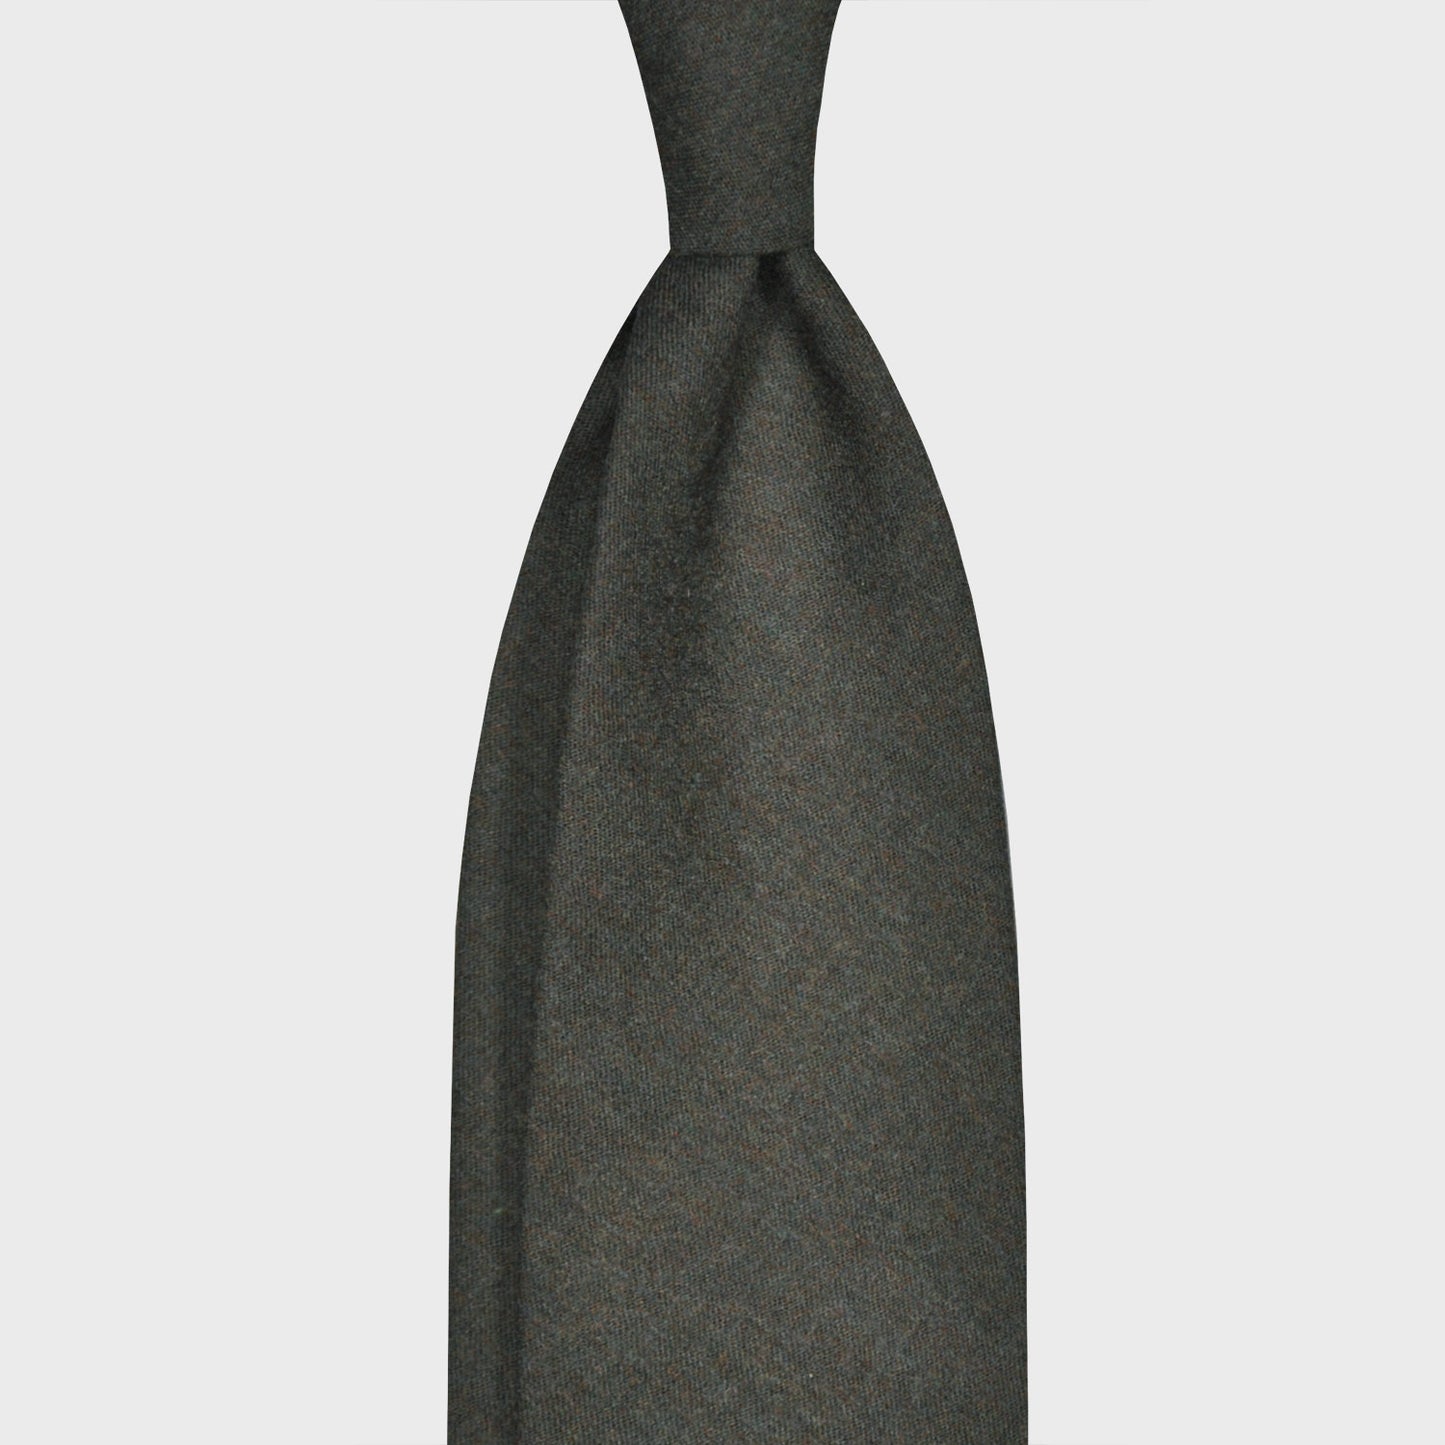 Load image into Gallery viewer, F.Marino Flannel Wool Tie 3 Folds Mud-Wools Boutique Uomo
